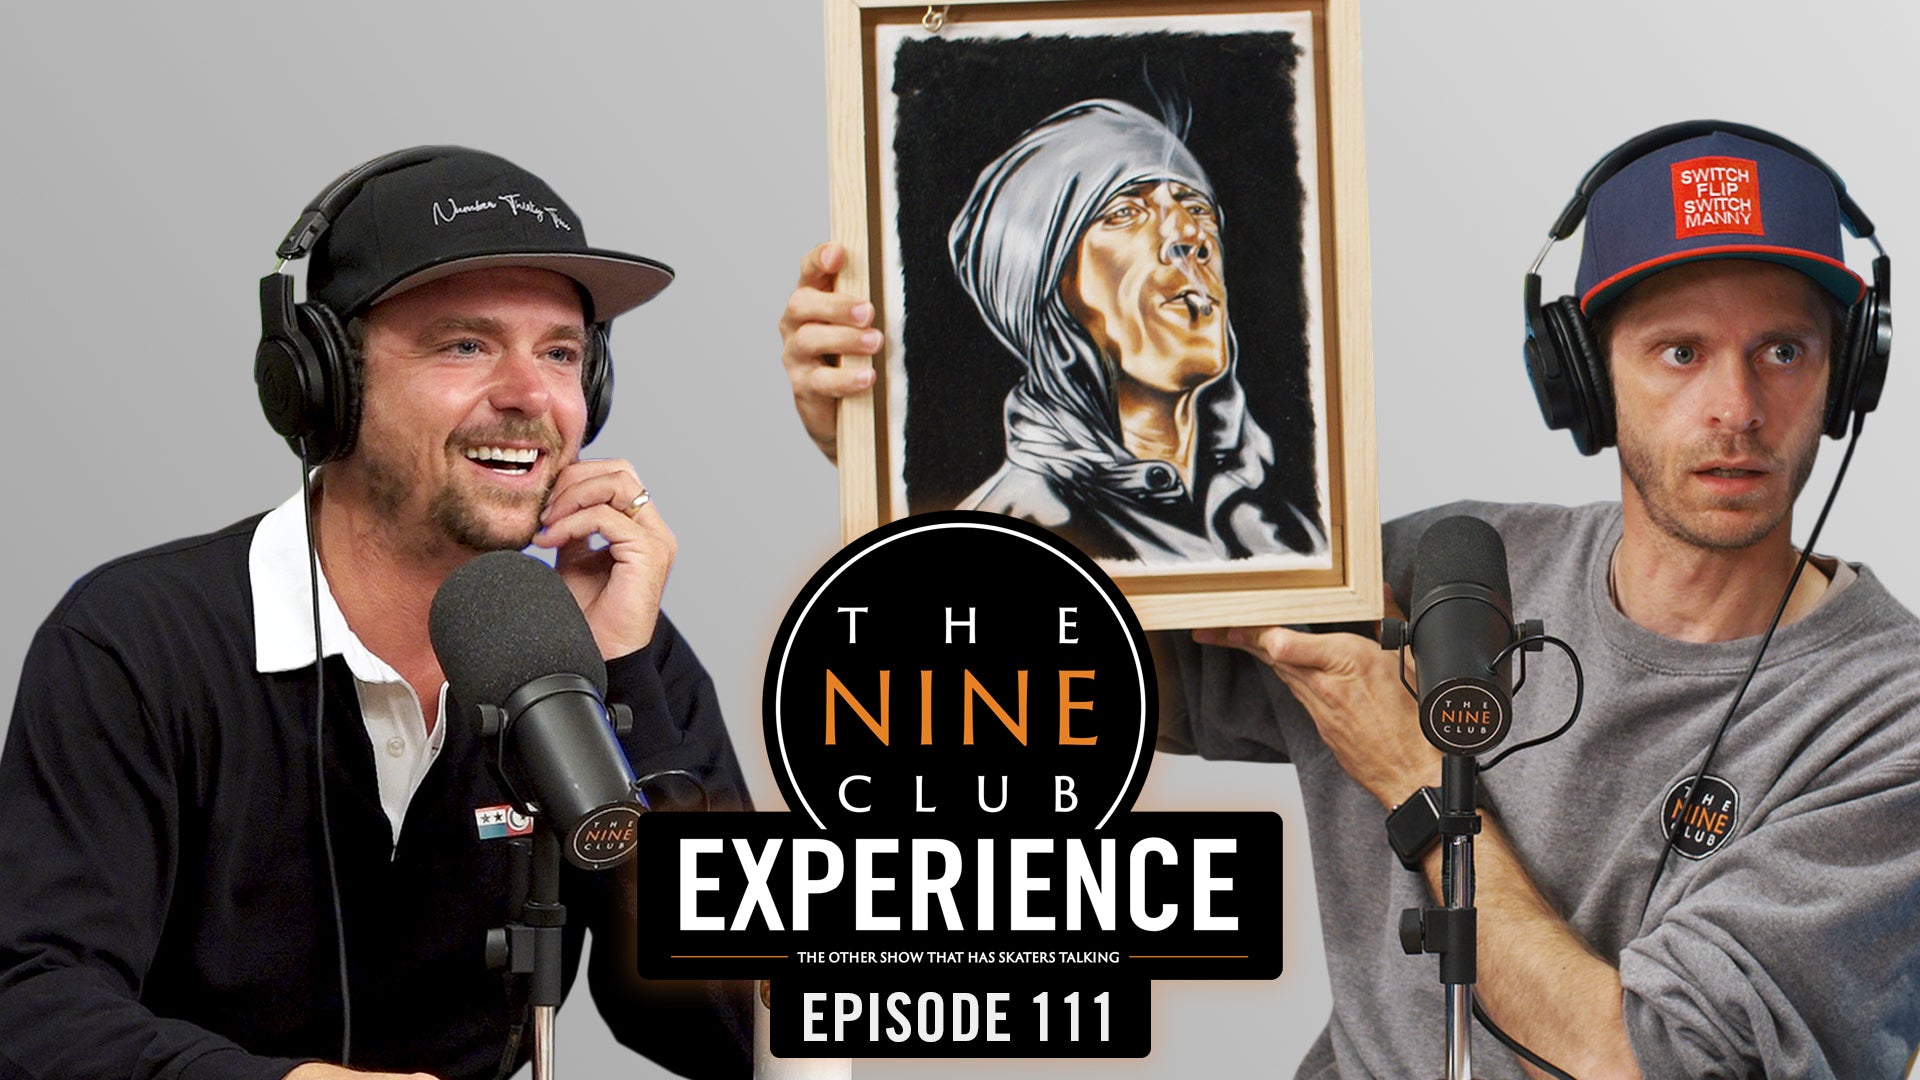 The Nine Club Experience Episode 111